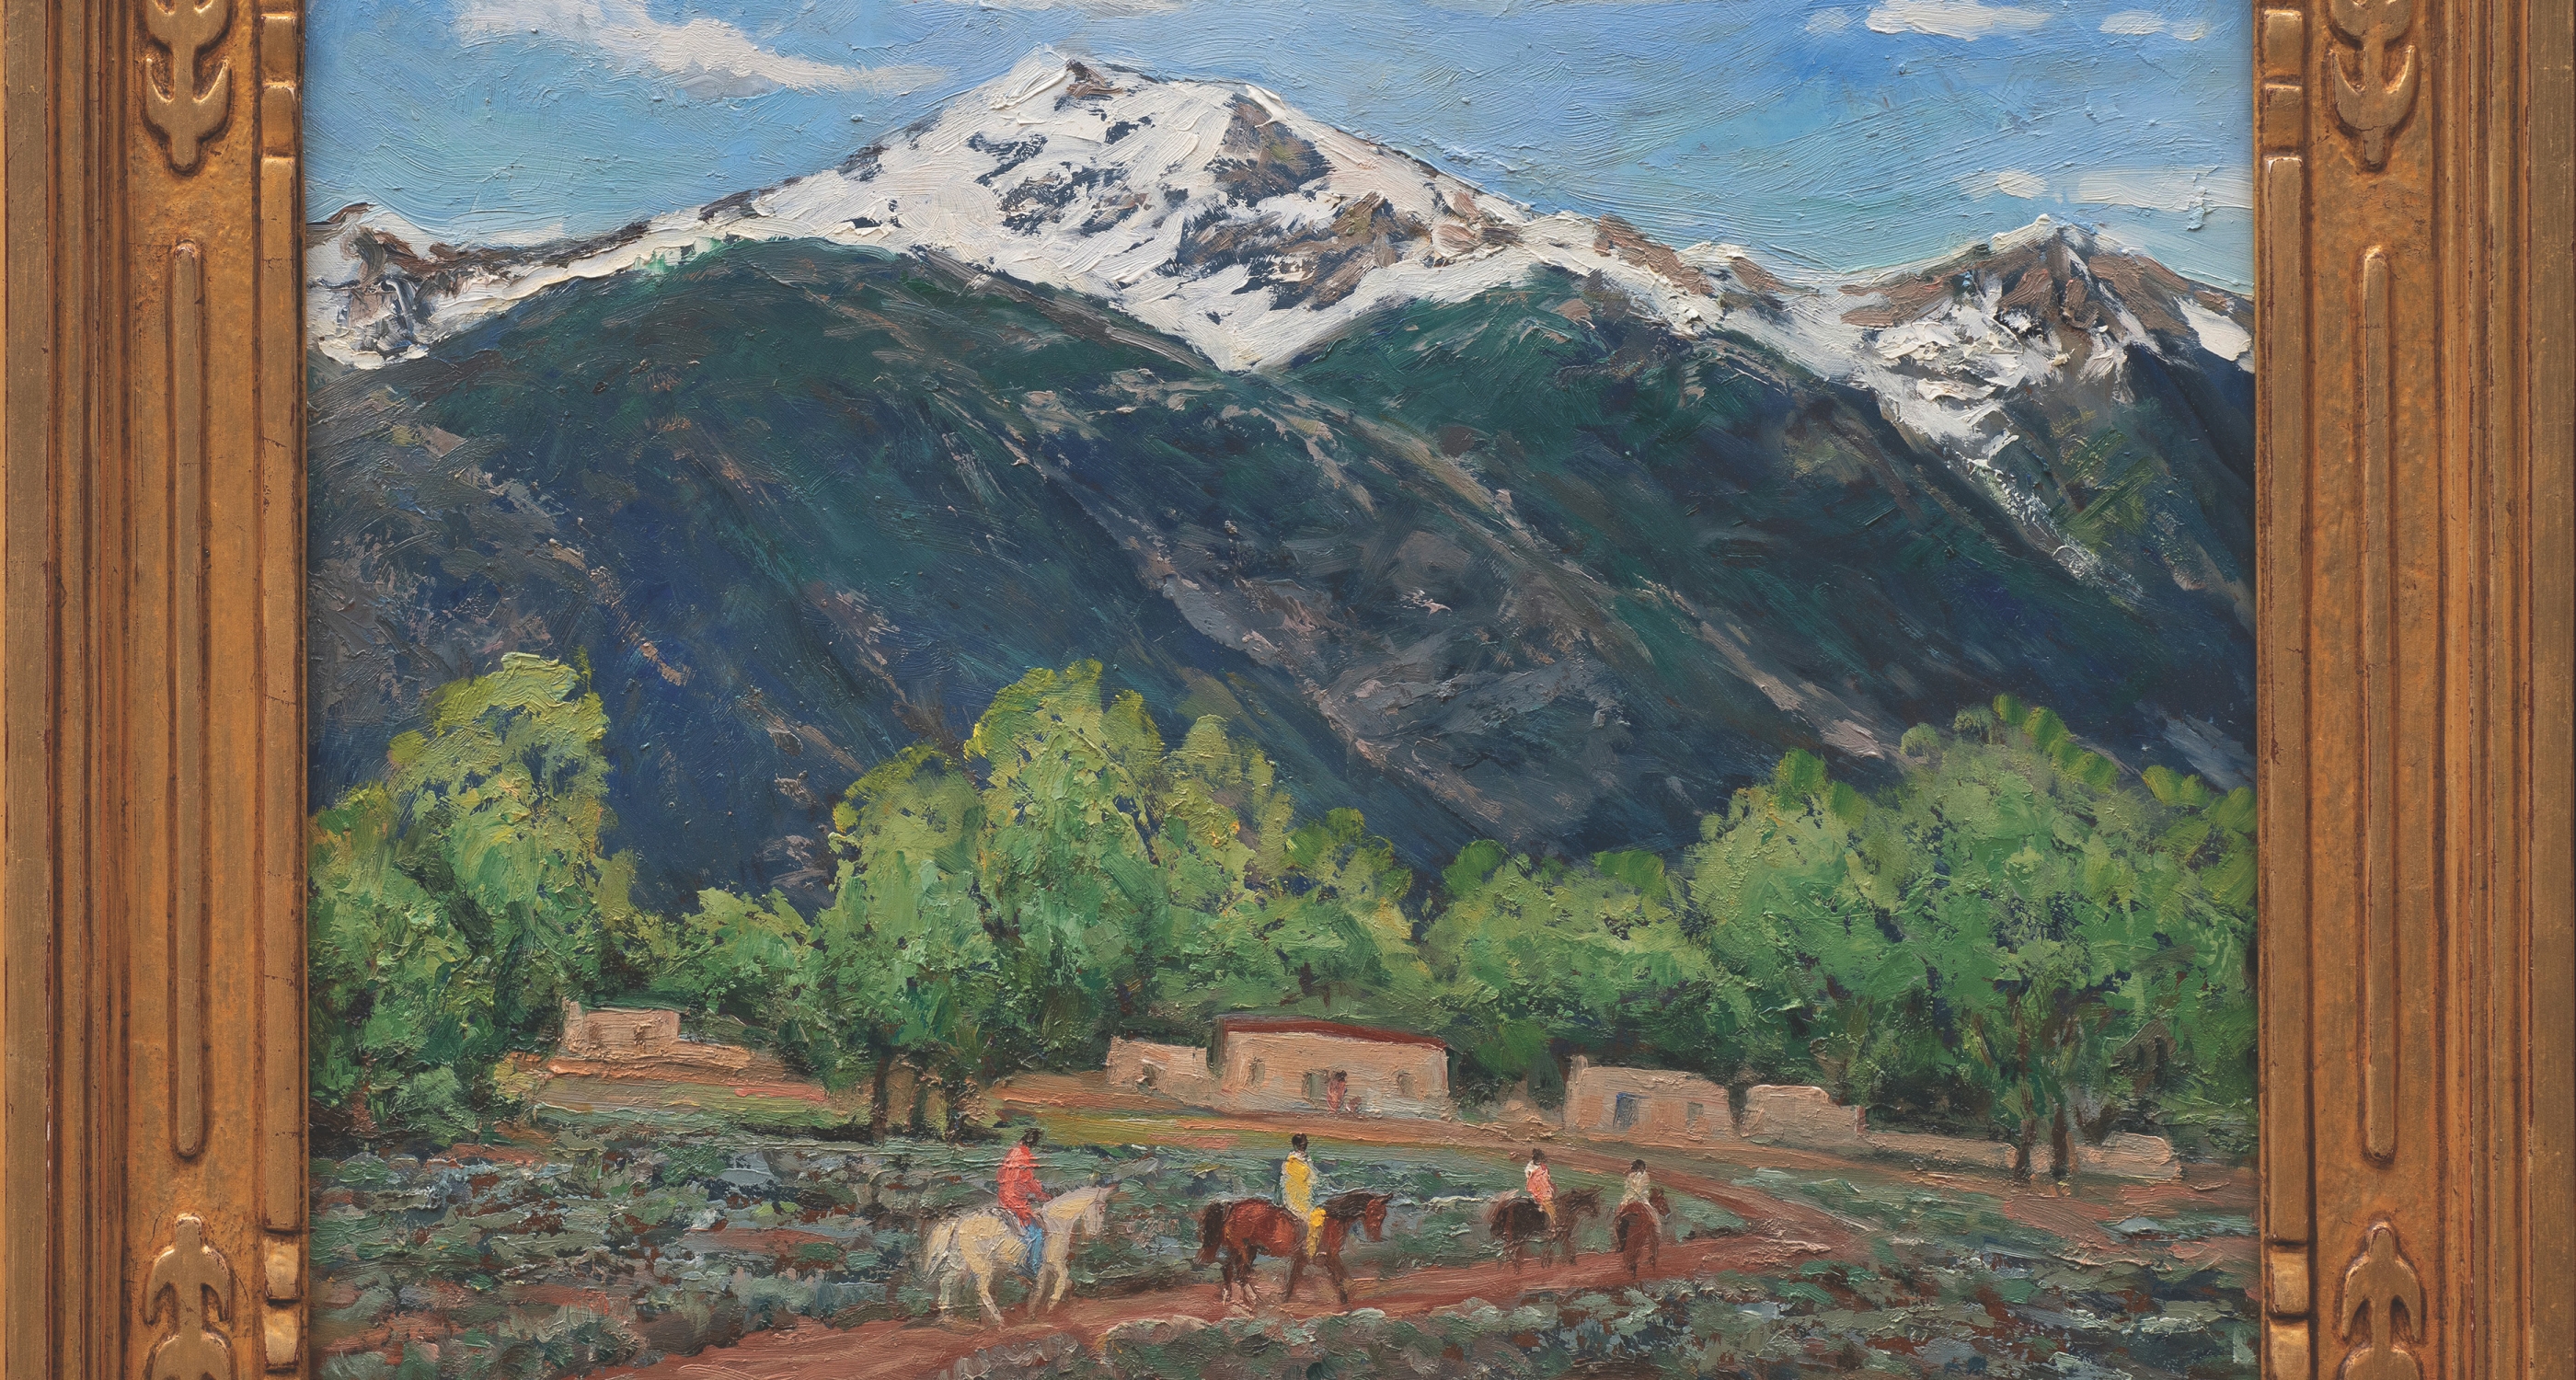 17. Ila McAfee (1897–1995) "Taos Valley in Early Spring," d.1930, oil on masonite, 15 7/8 x 19 7/8 inches